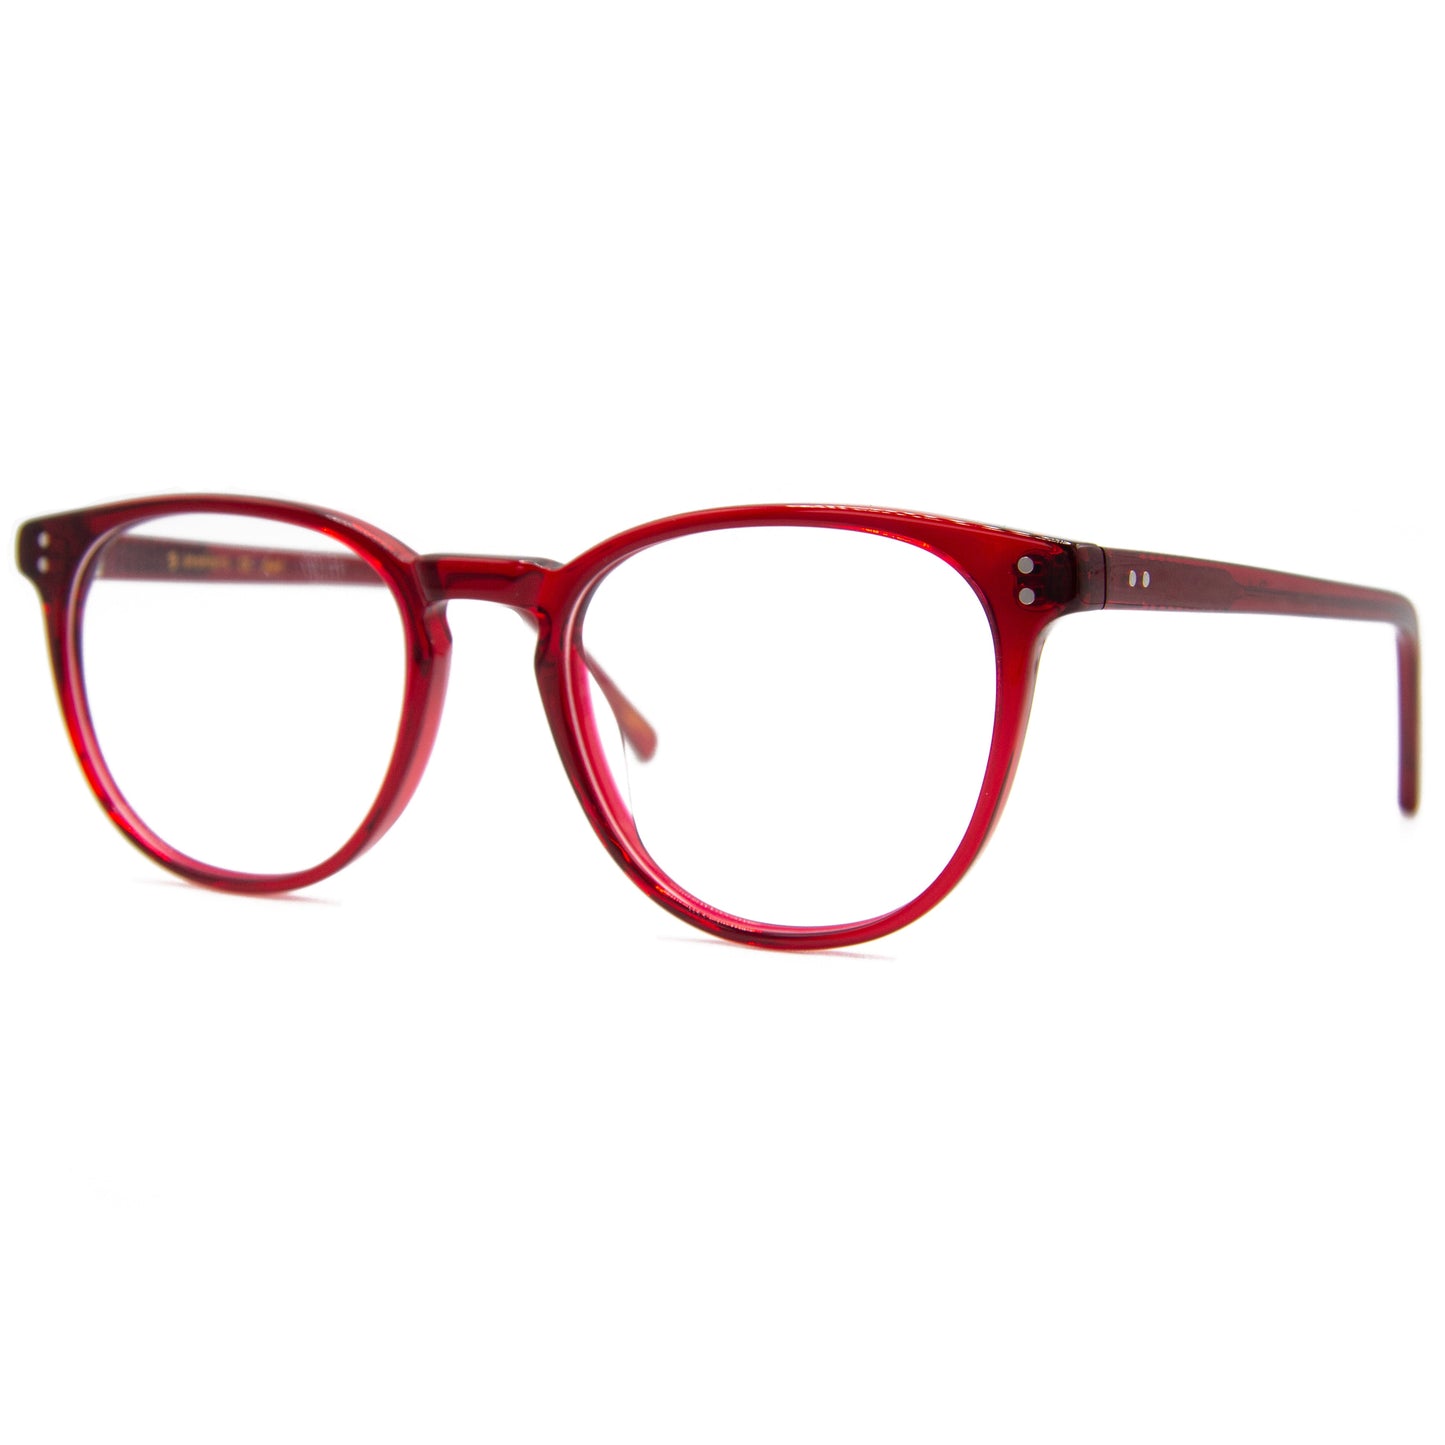 3 brothers - Ant - Red - Prescription Glasses - Side